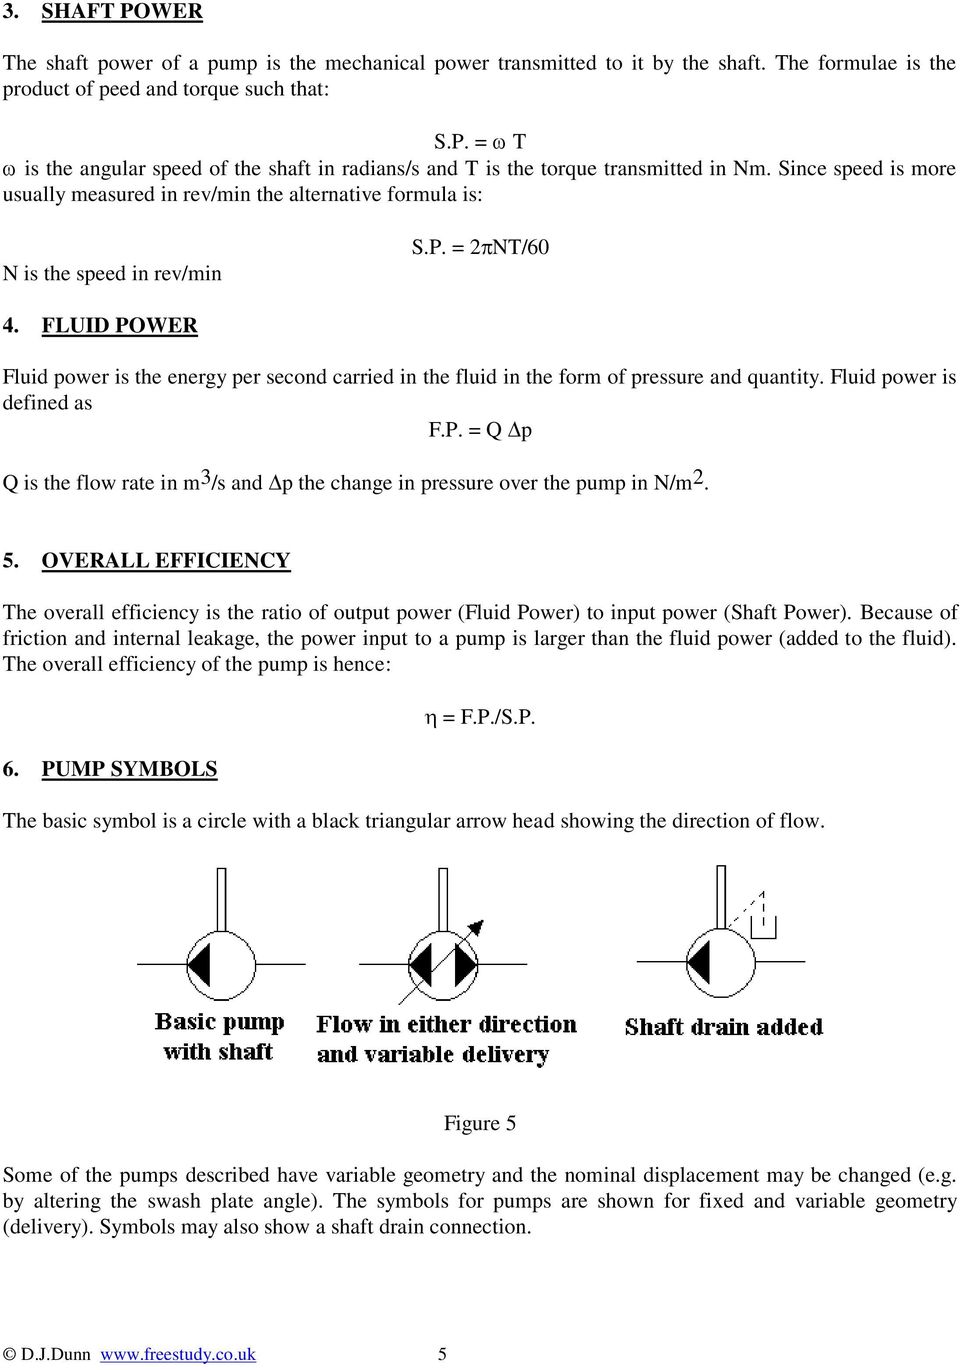 FLUID POWER Fluid power is the energy per second carried in the fluid in the form of pressure and quantity. Fluid power is defined as F.P. = Q p Q is the flow rate in m 3 /s and p the change in pressure over the pump in N/m 2.